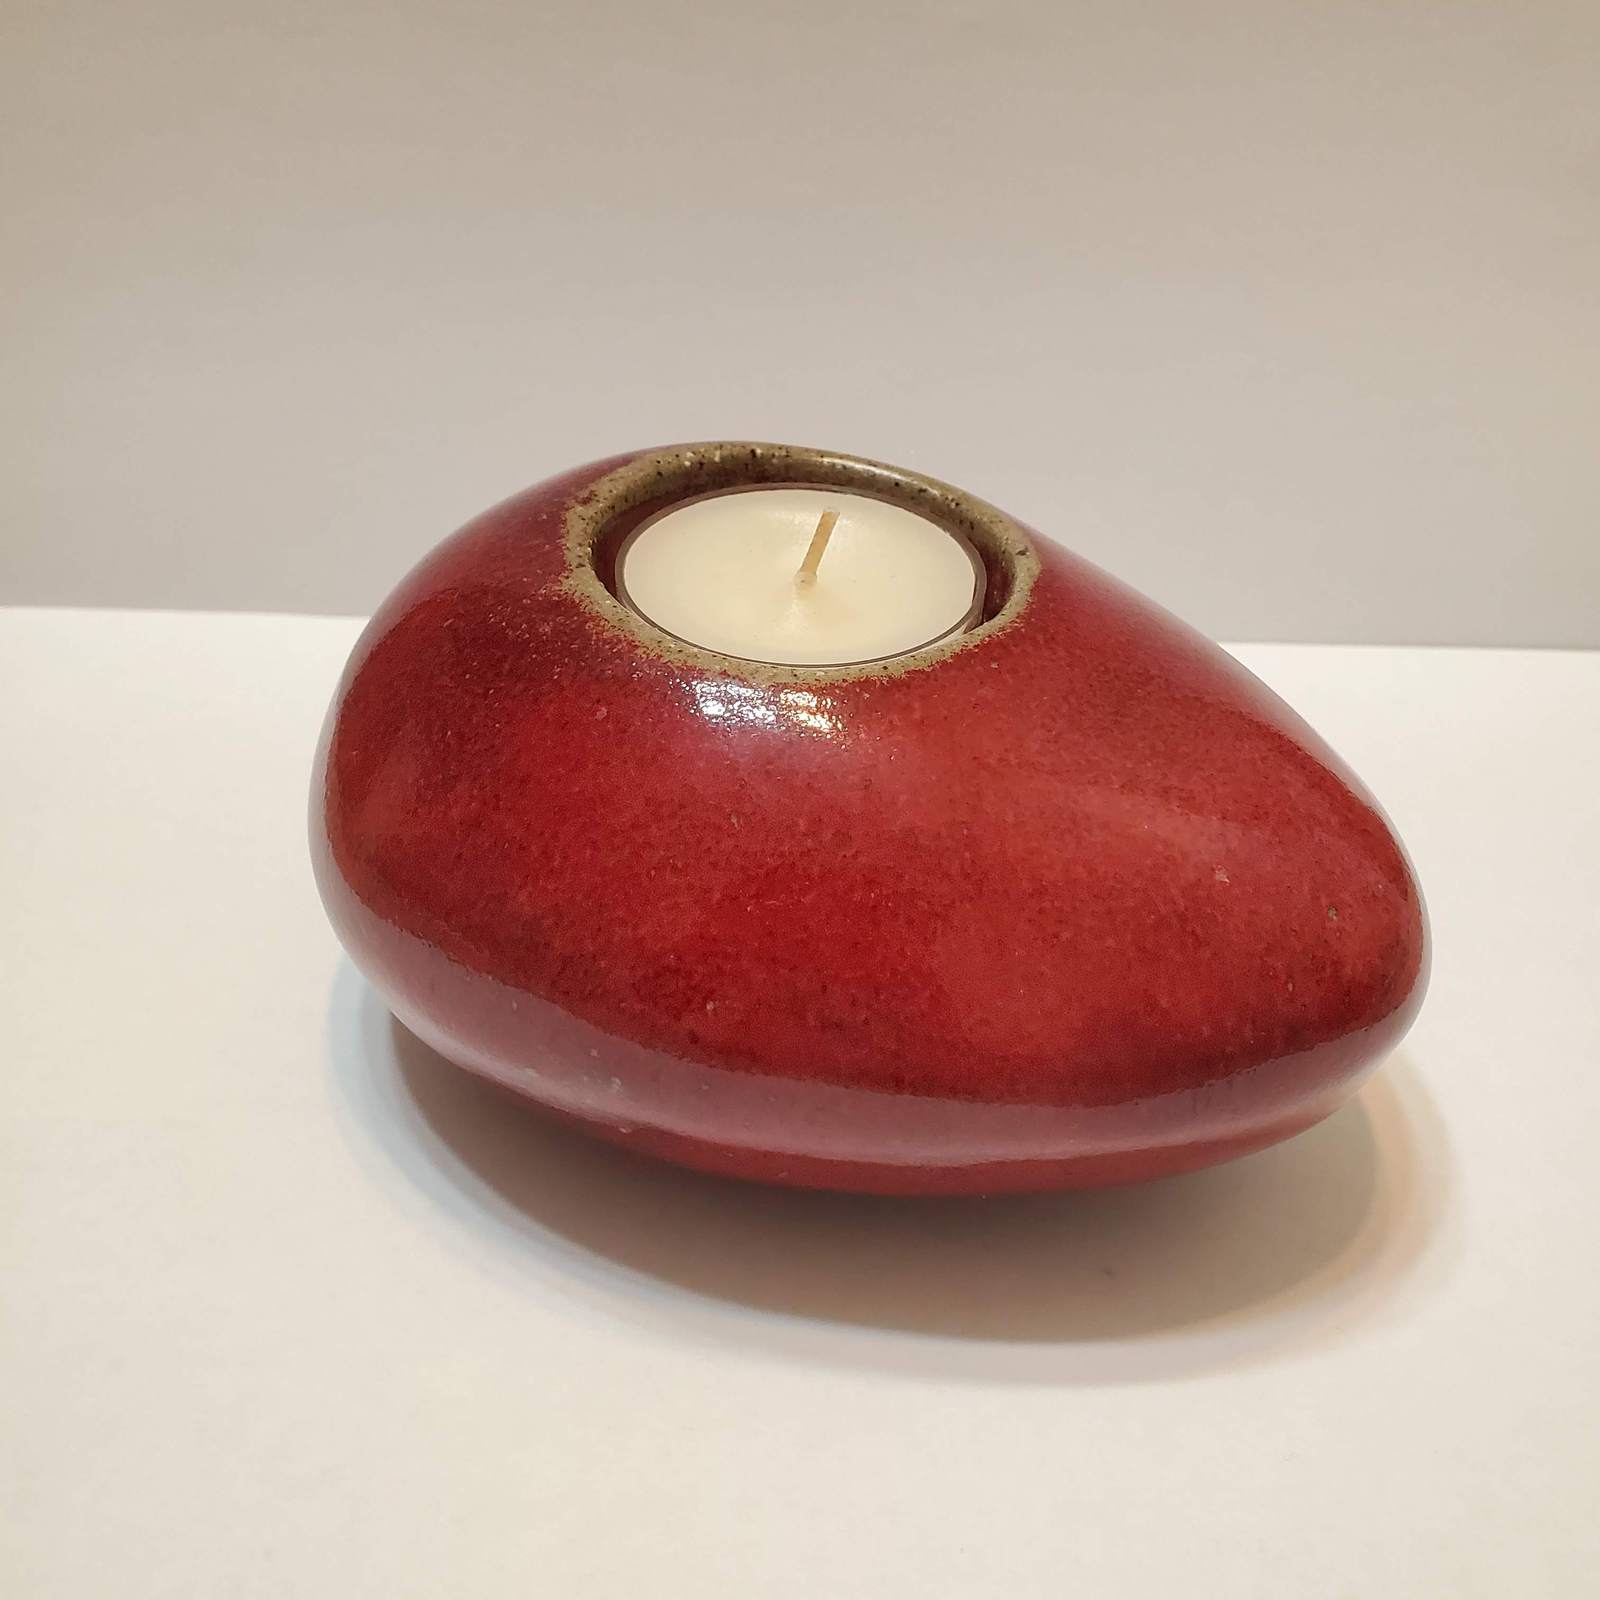 Red Stoneware Tealight Candle Holder, Made in Vietnam, Heavy Egg Shaped Pottery - $14.99